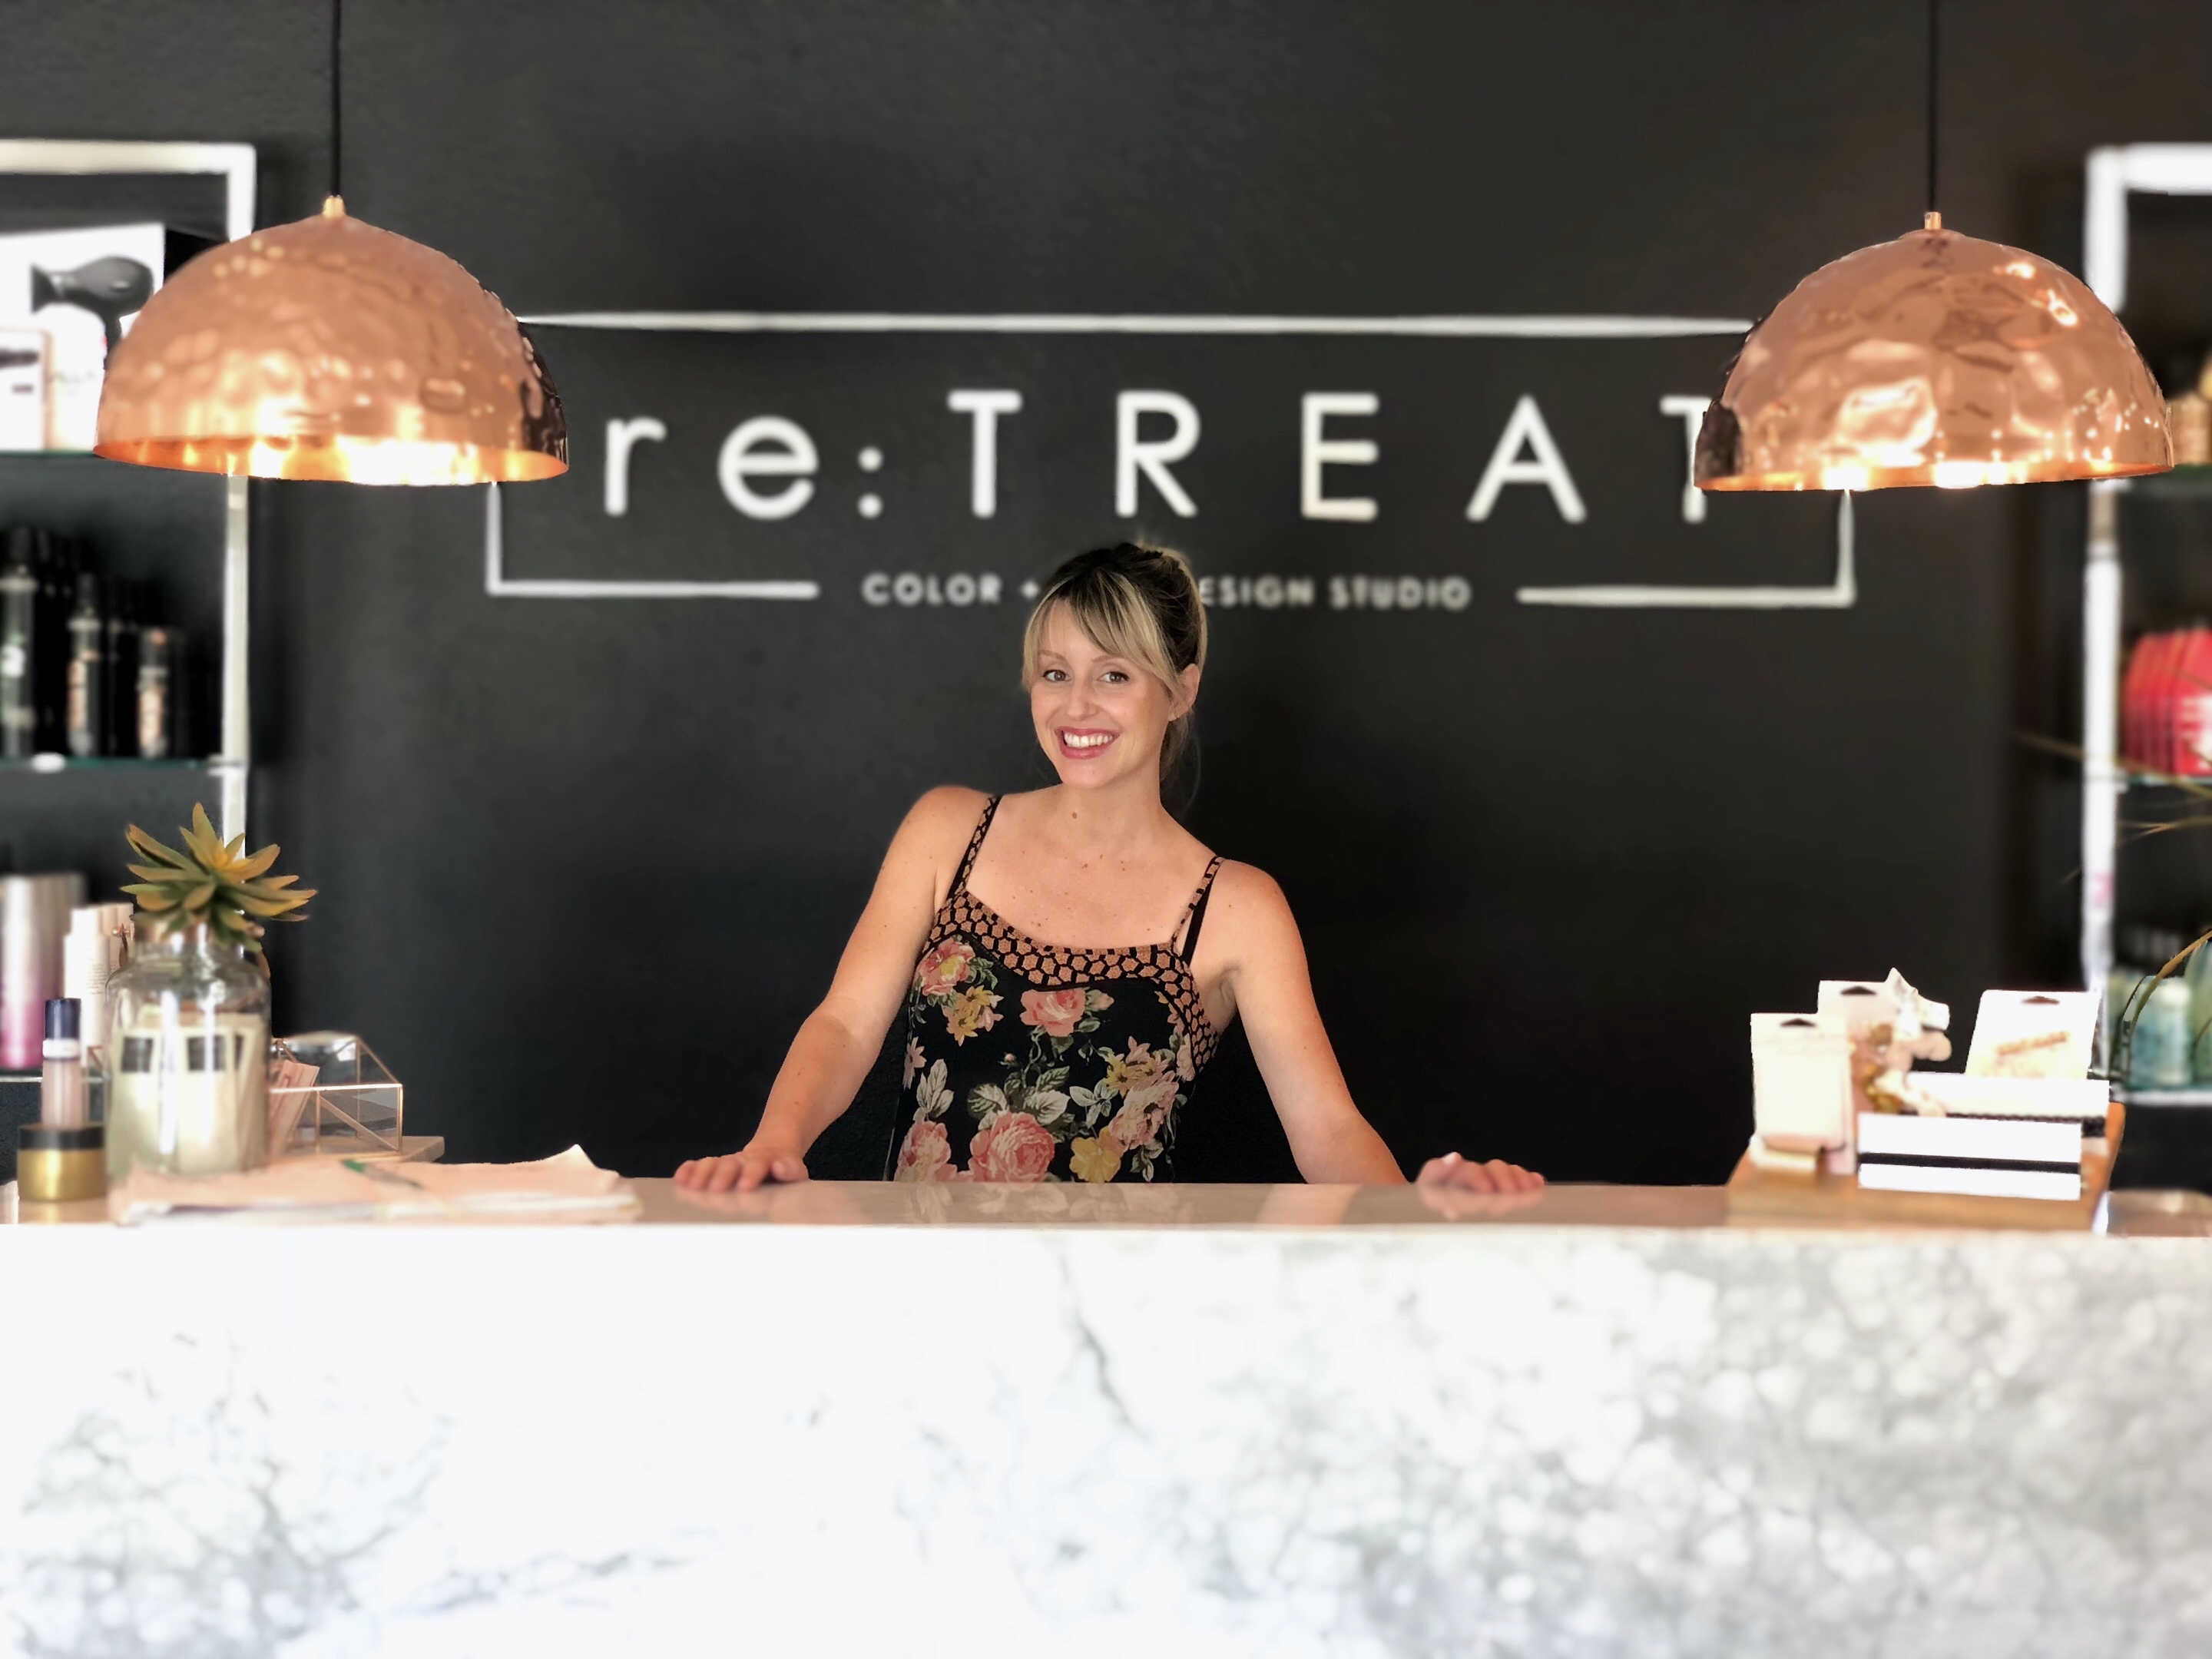 Anna greets guests at retreat hair studio in clovis